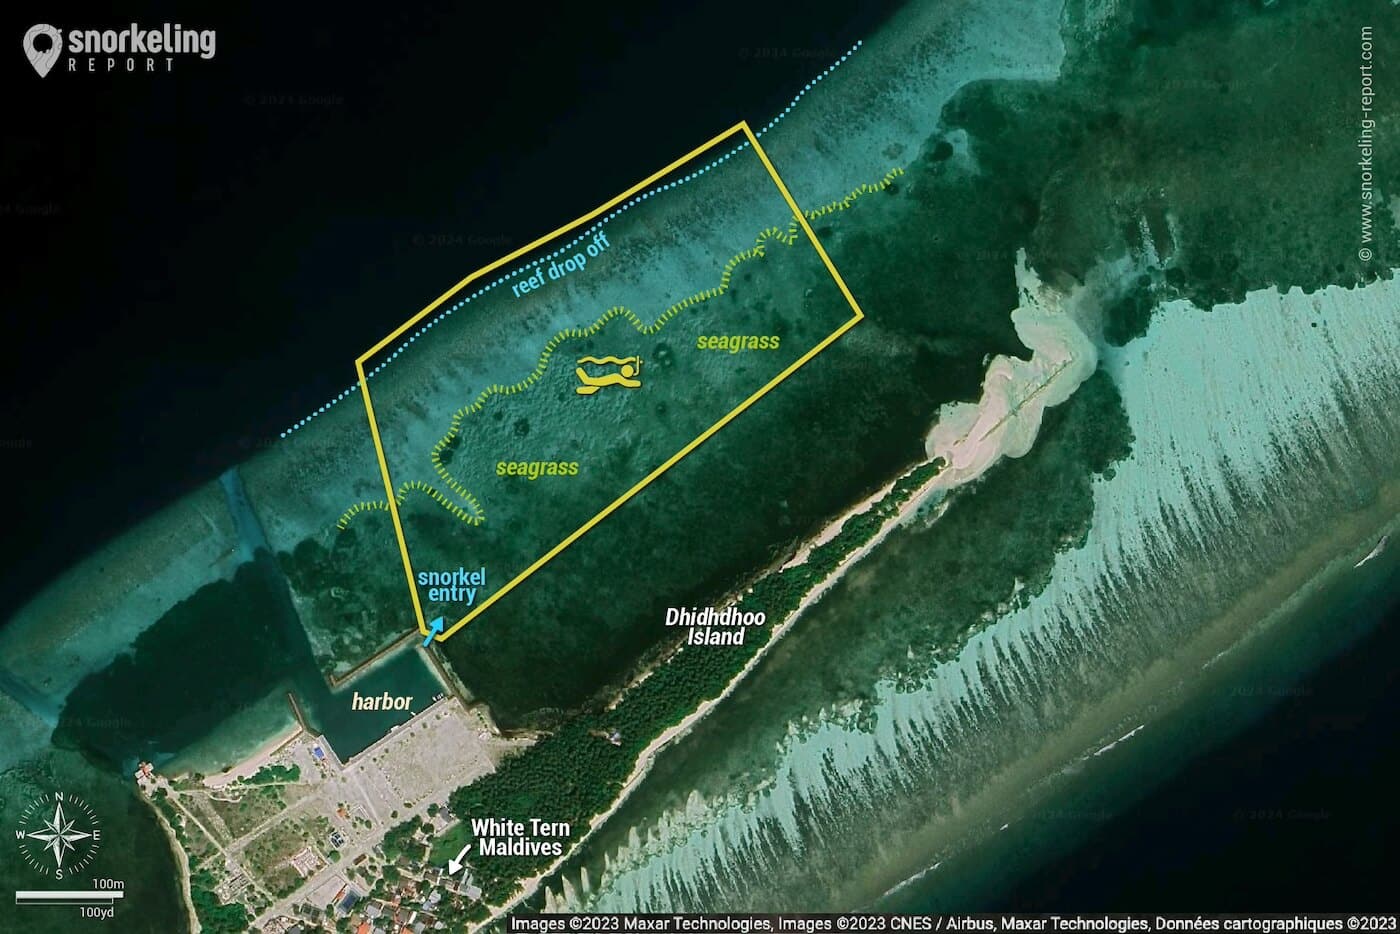 Dhidhdhoo Island snorkeling map